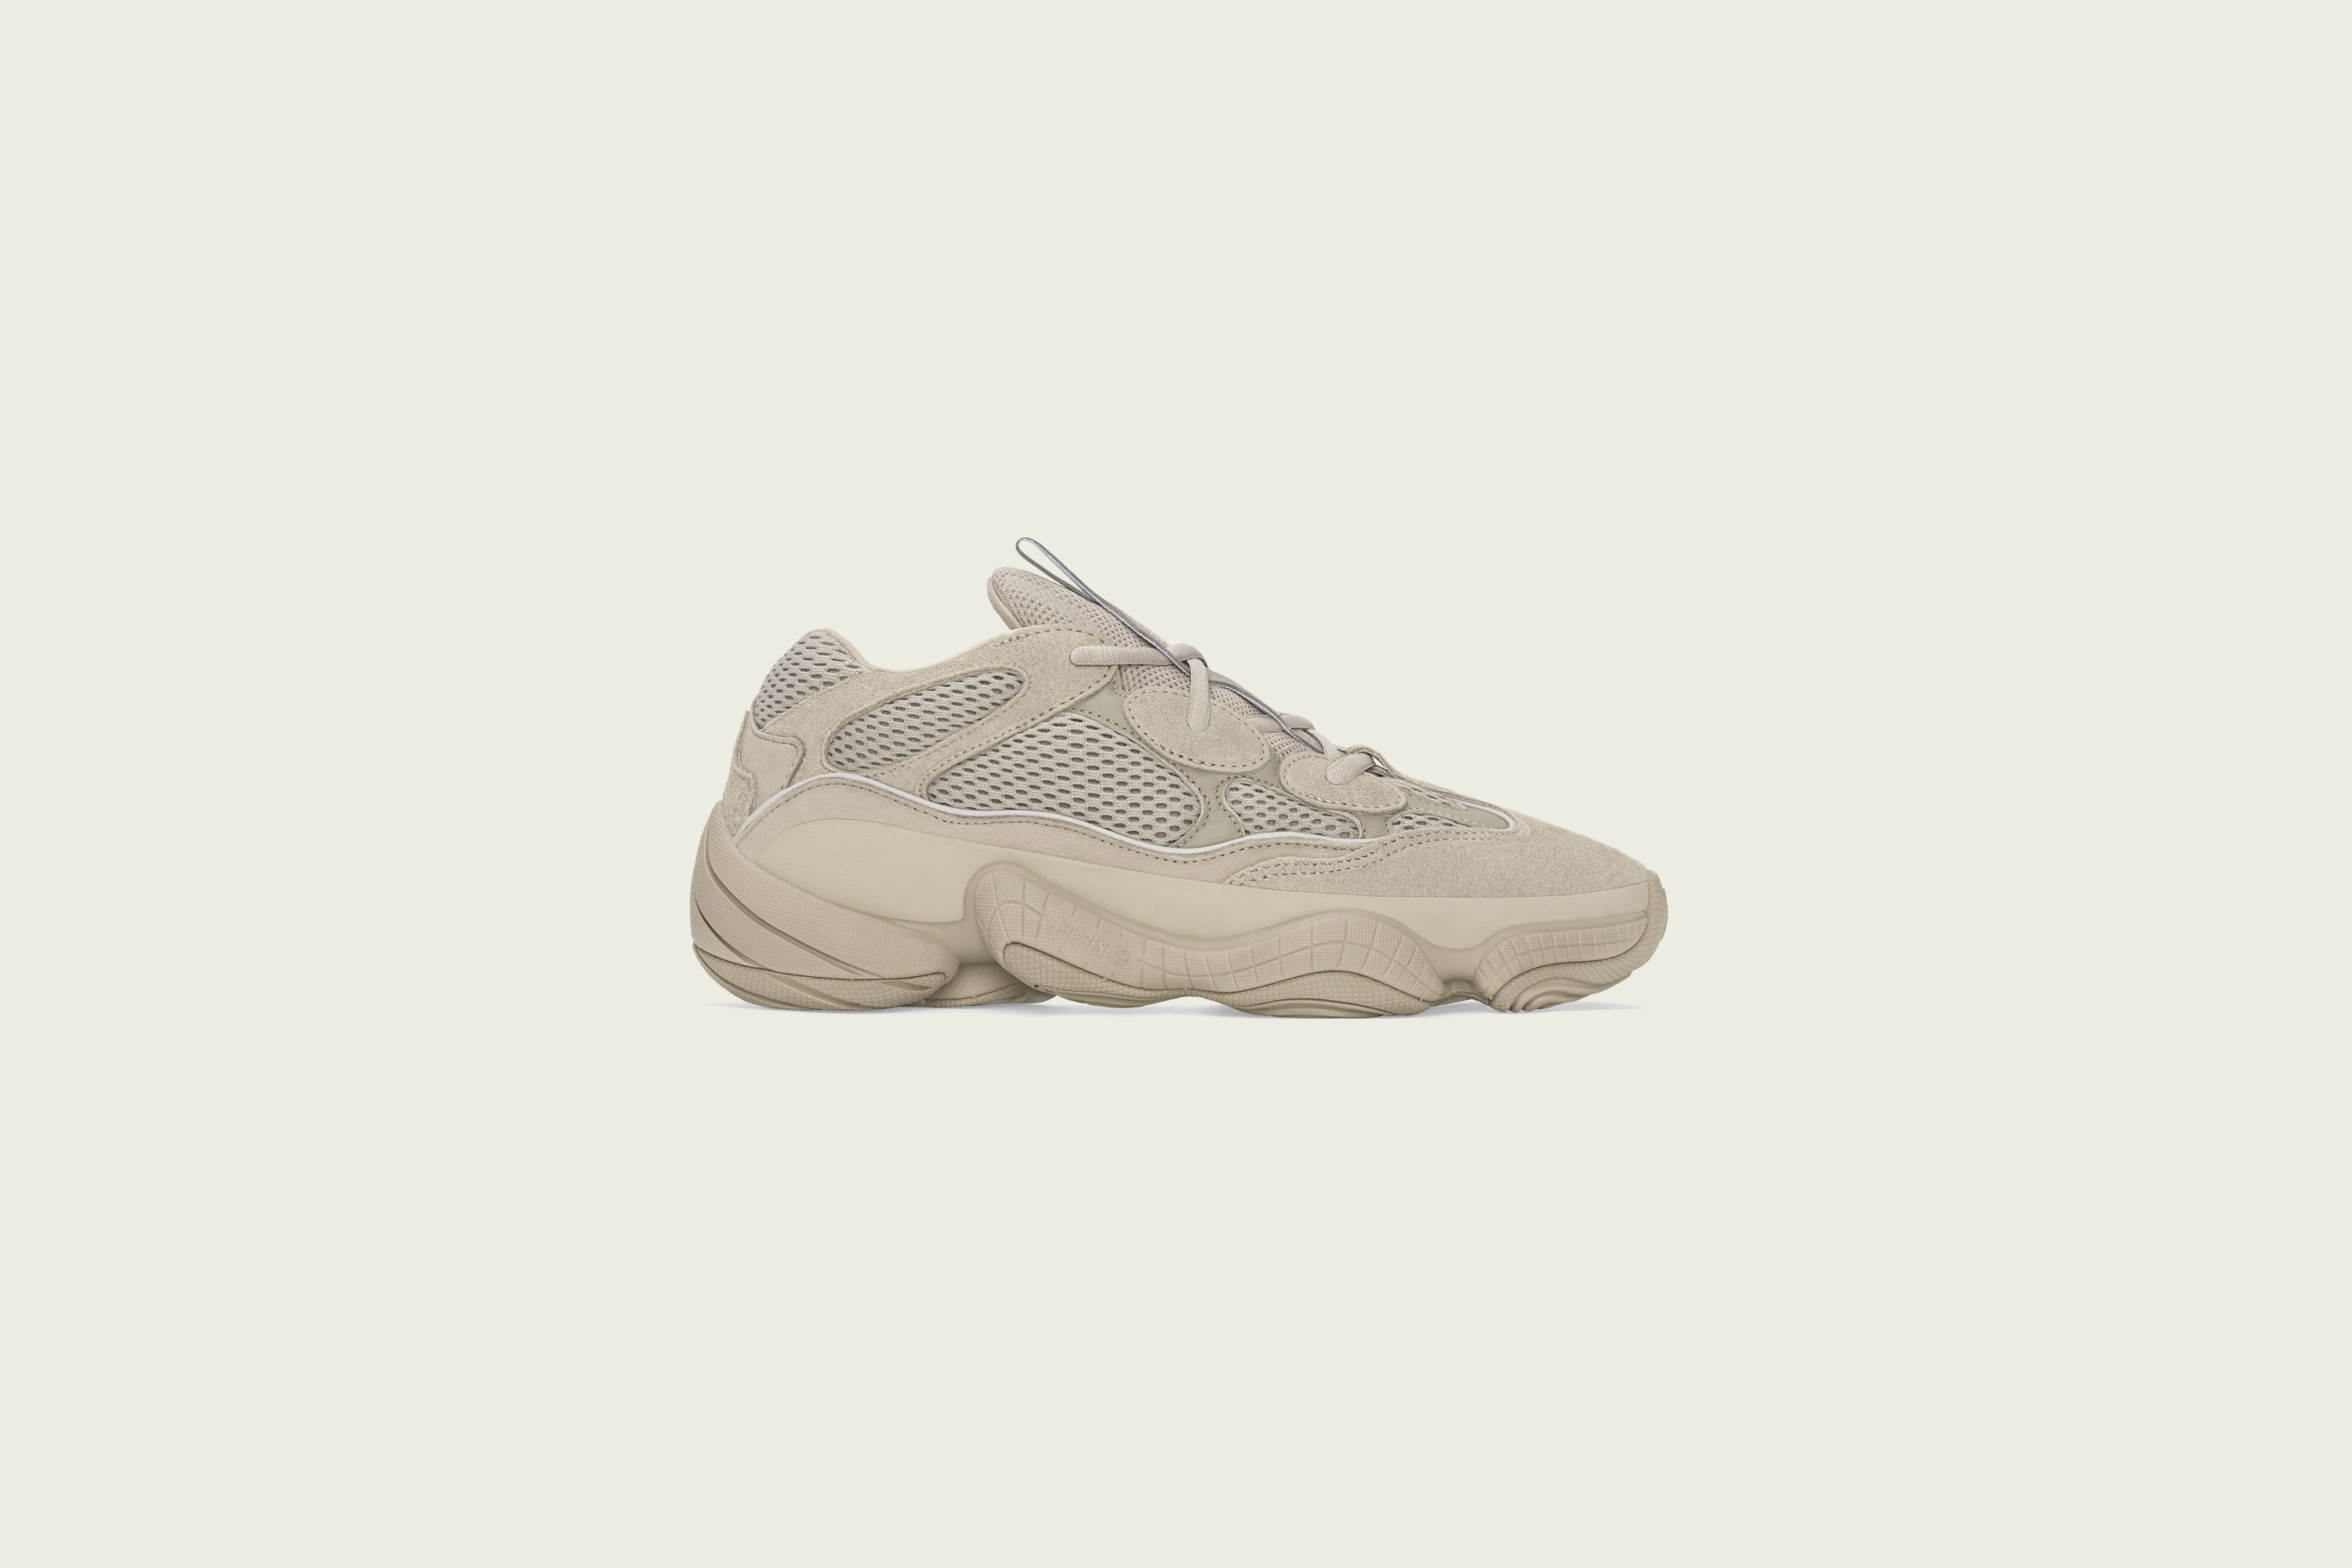 adidas - Yeezy 500 - Taupe Light - Up There